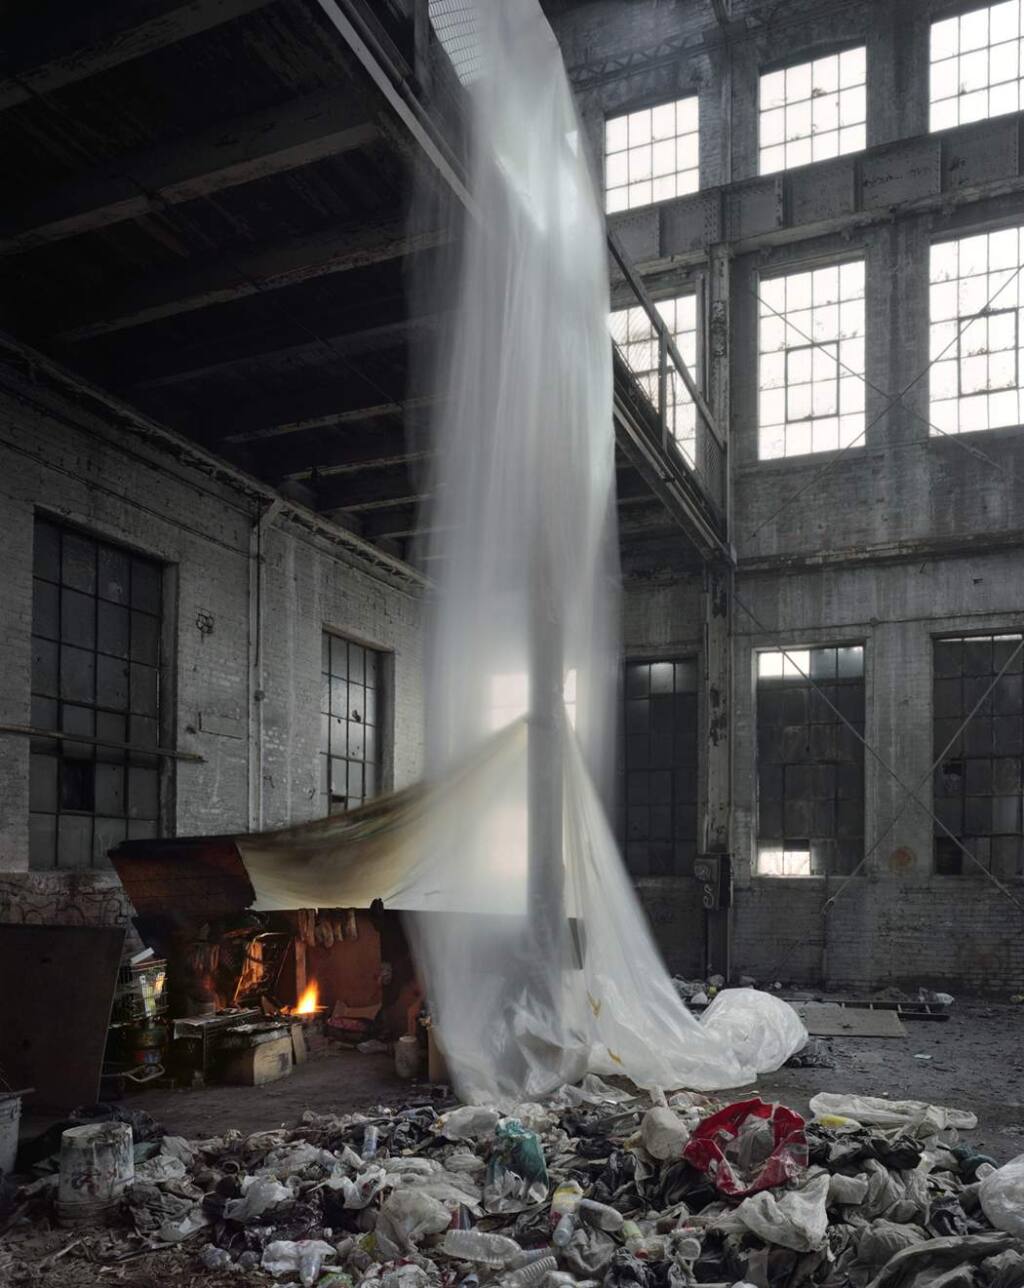 Andrew Moore, whose piece 'A Moore Detroit Dry Dock' is on display in “Time and Place: Human Impact and Our Changing Environment,' is known for his photographic series that record the effect of time on the natural and man-made landscapes. (COURTESY PHOTO)